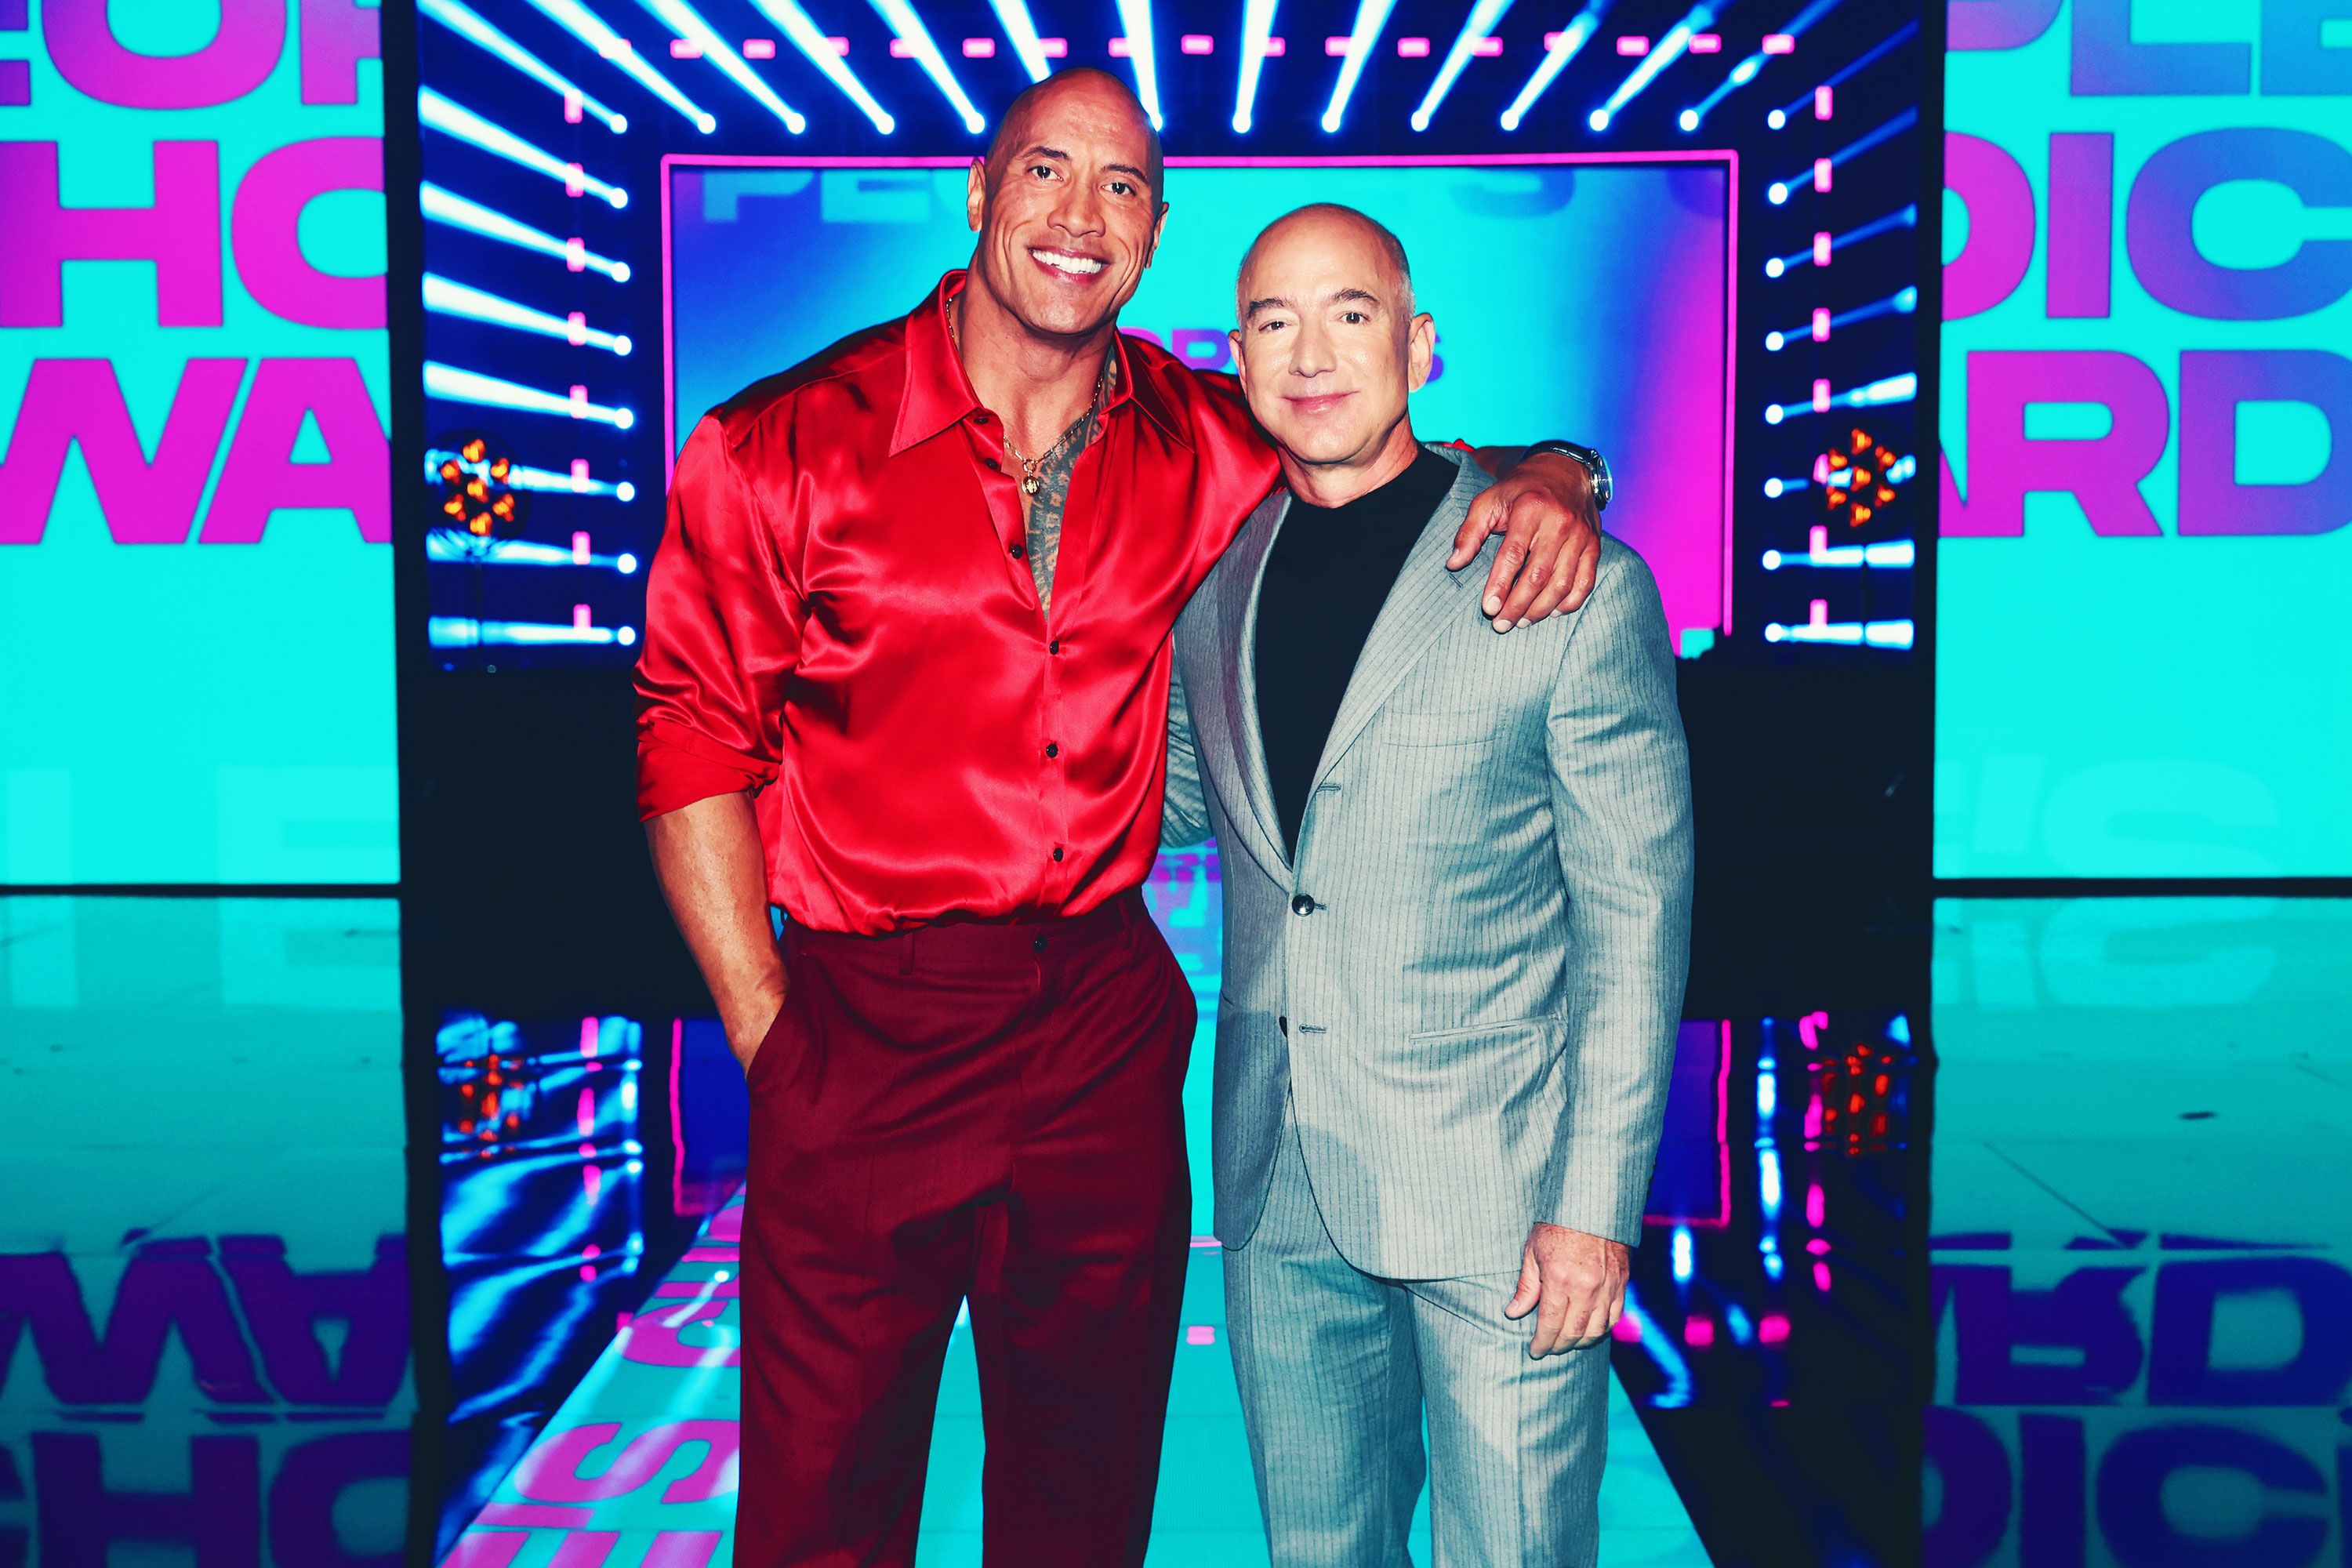 The Rock and Jeff Bezos Are Friends?